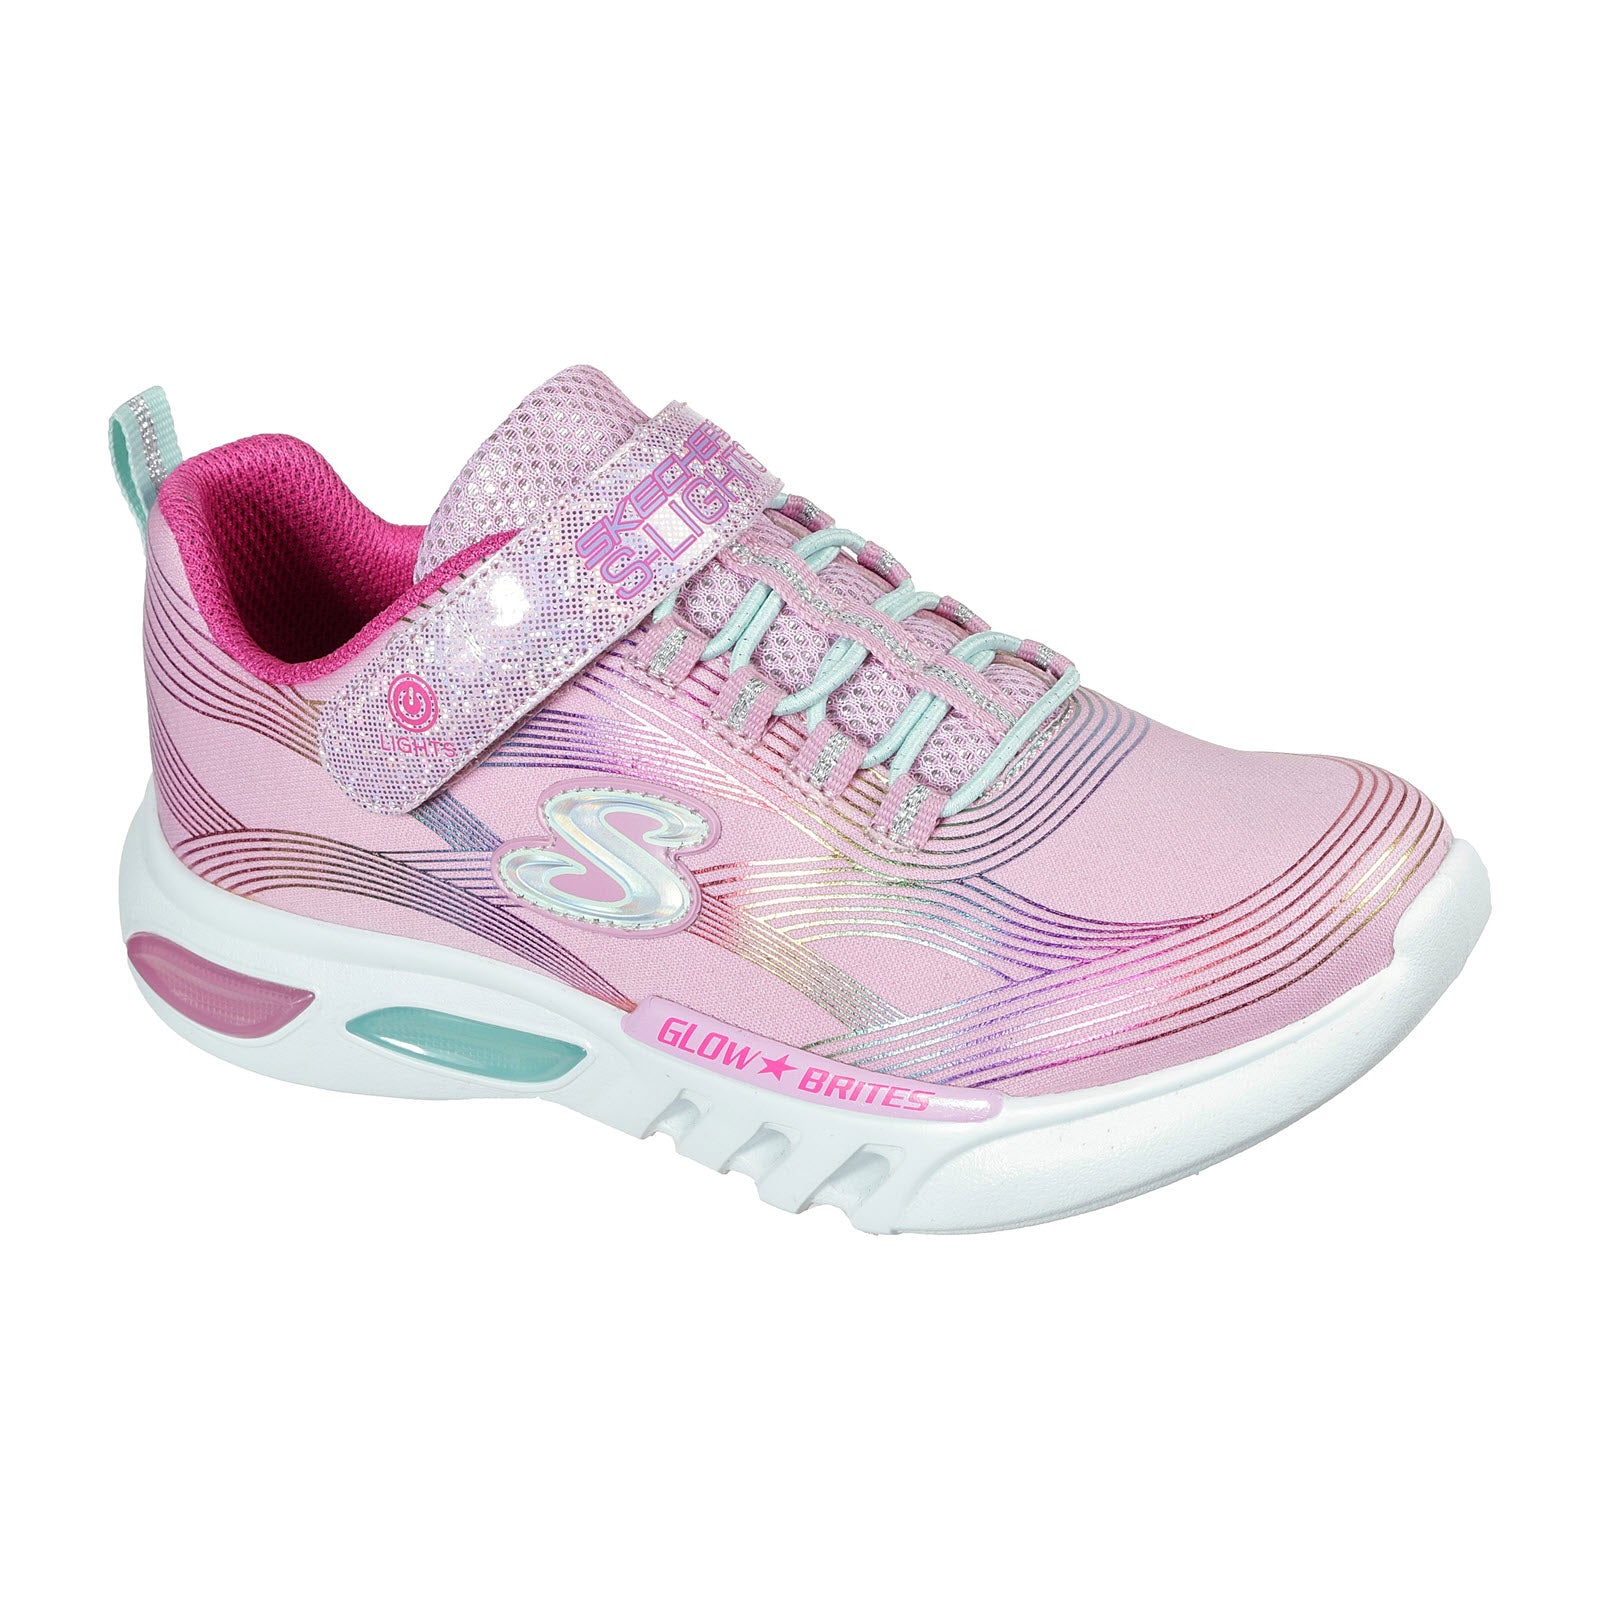 Children's multicolored Skechers Glow-Brites Pink Multi sneaker with light-up features and velcro strap.